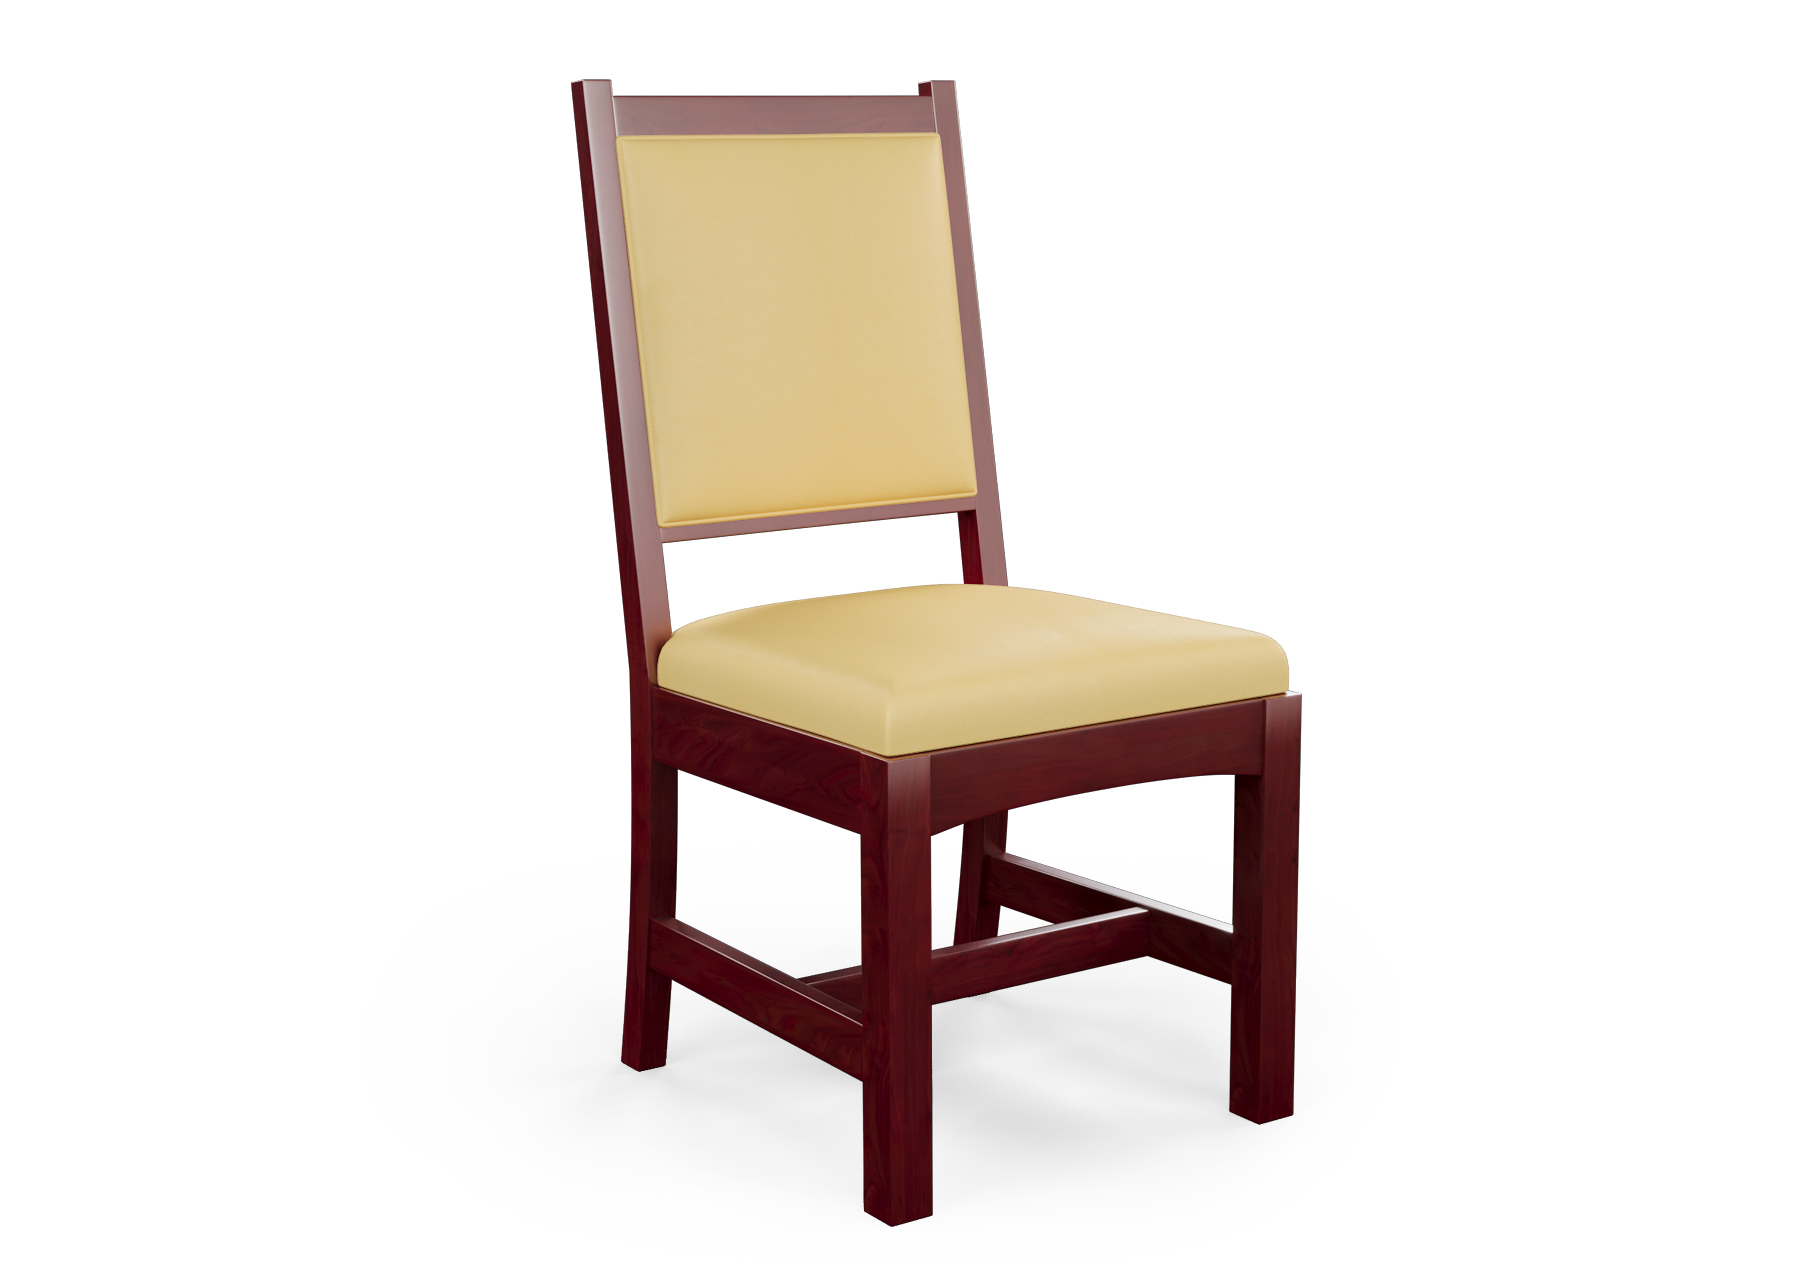  LIMA SIDE CHAIR